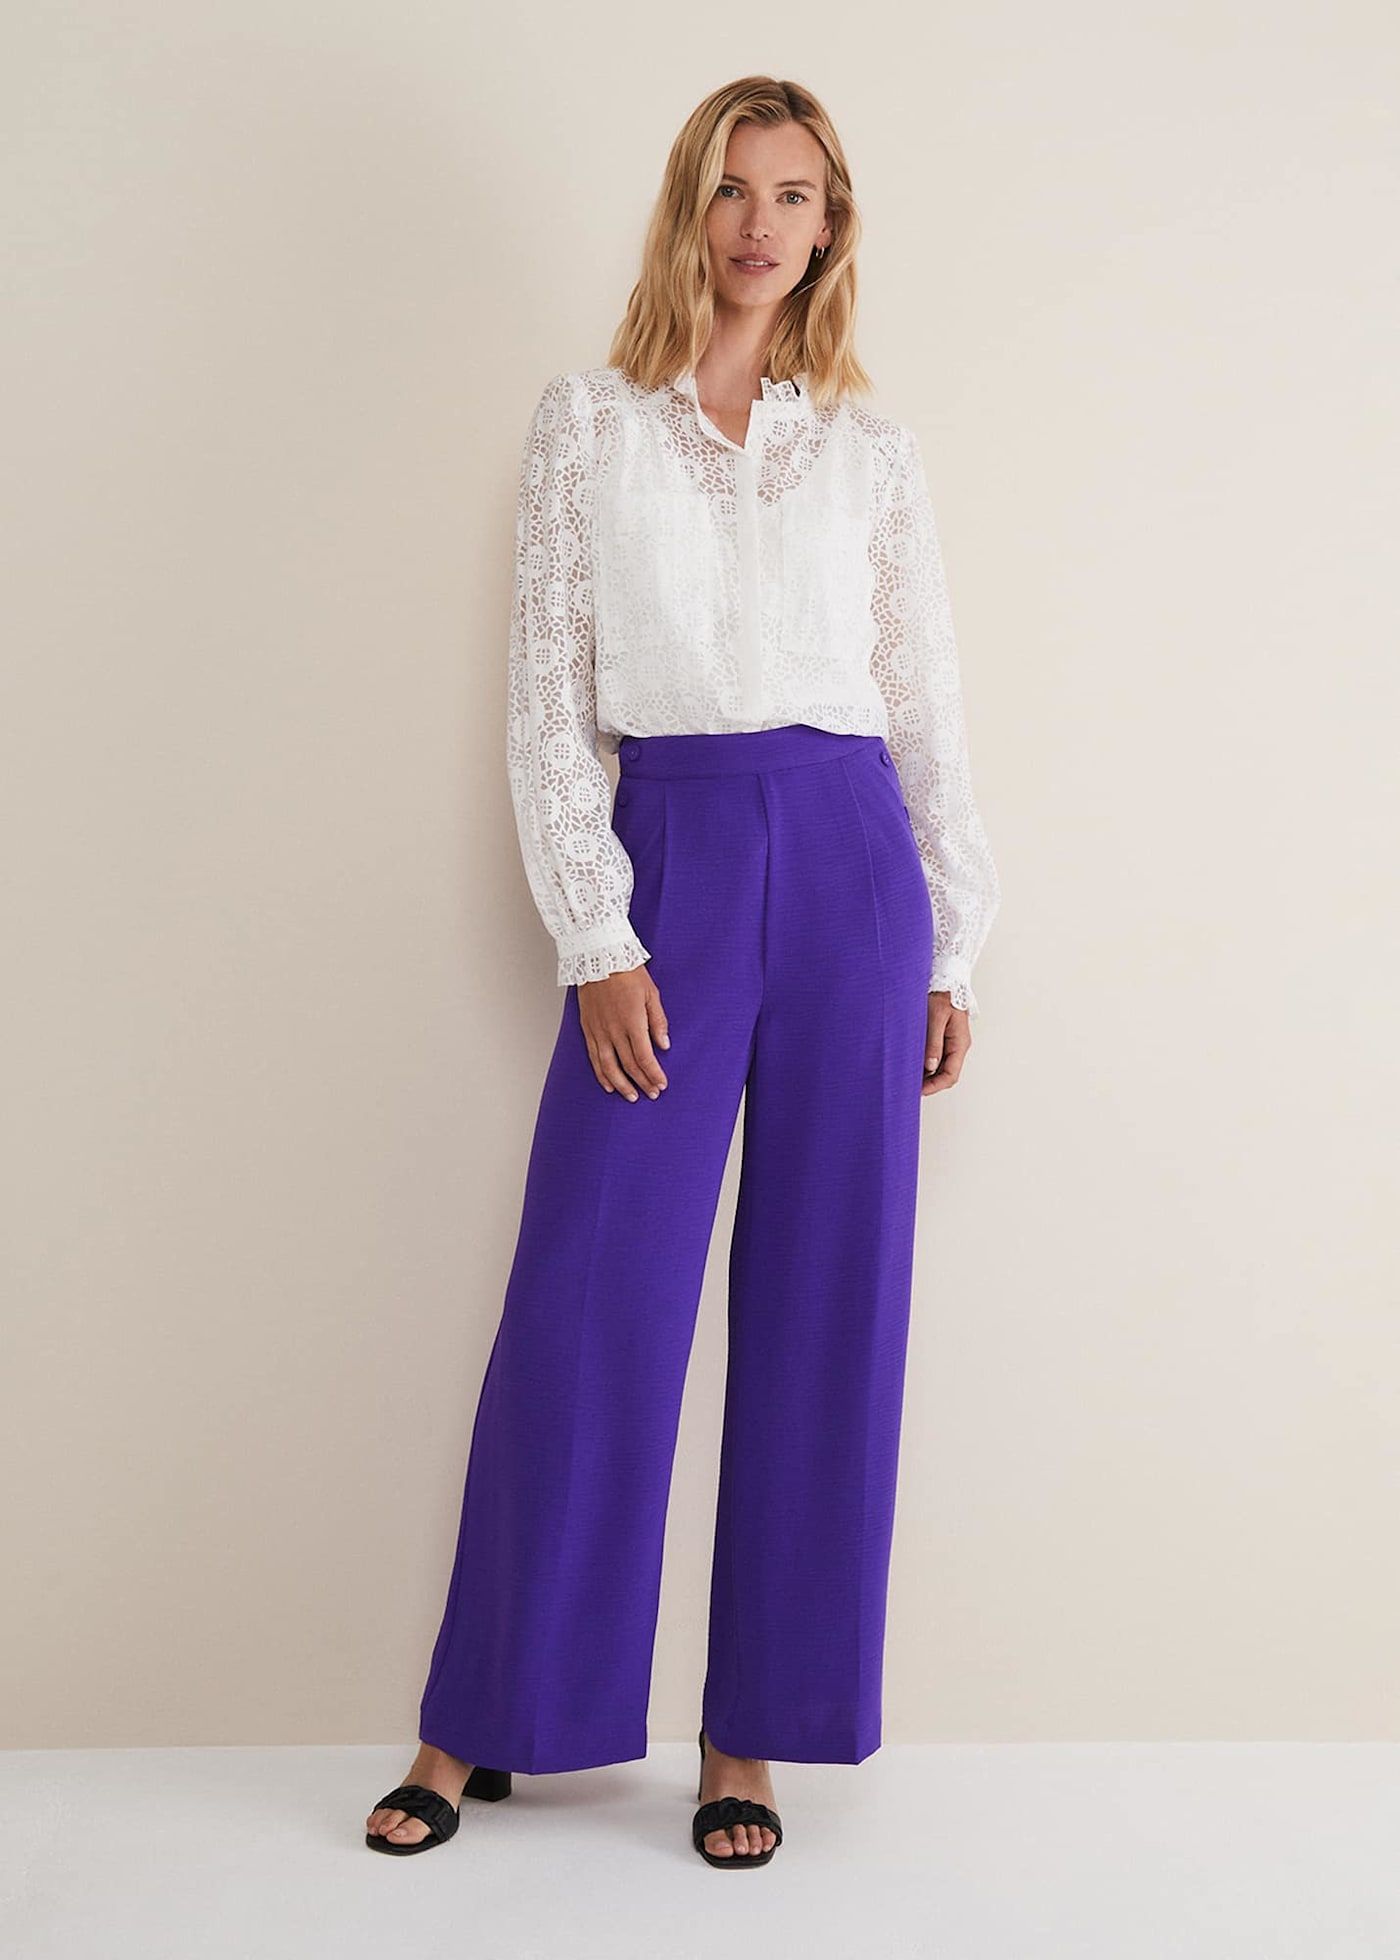 Chic Women's Pants | Free Shipping on $75+ | Shop Crescent